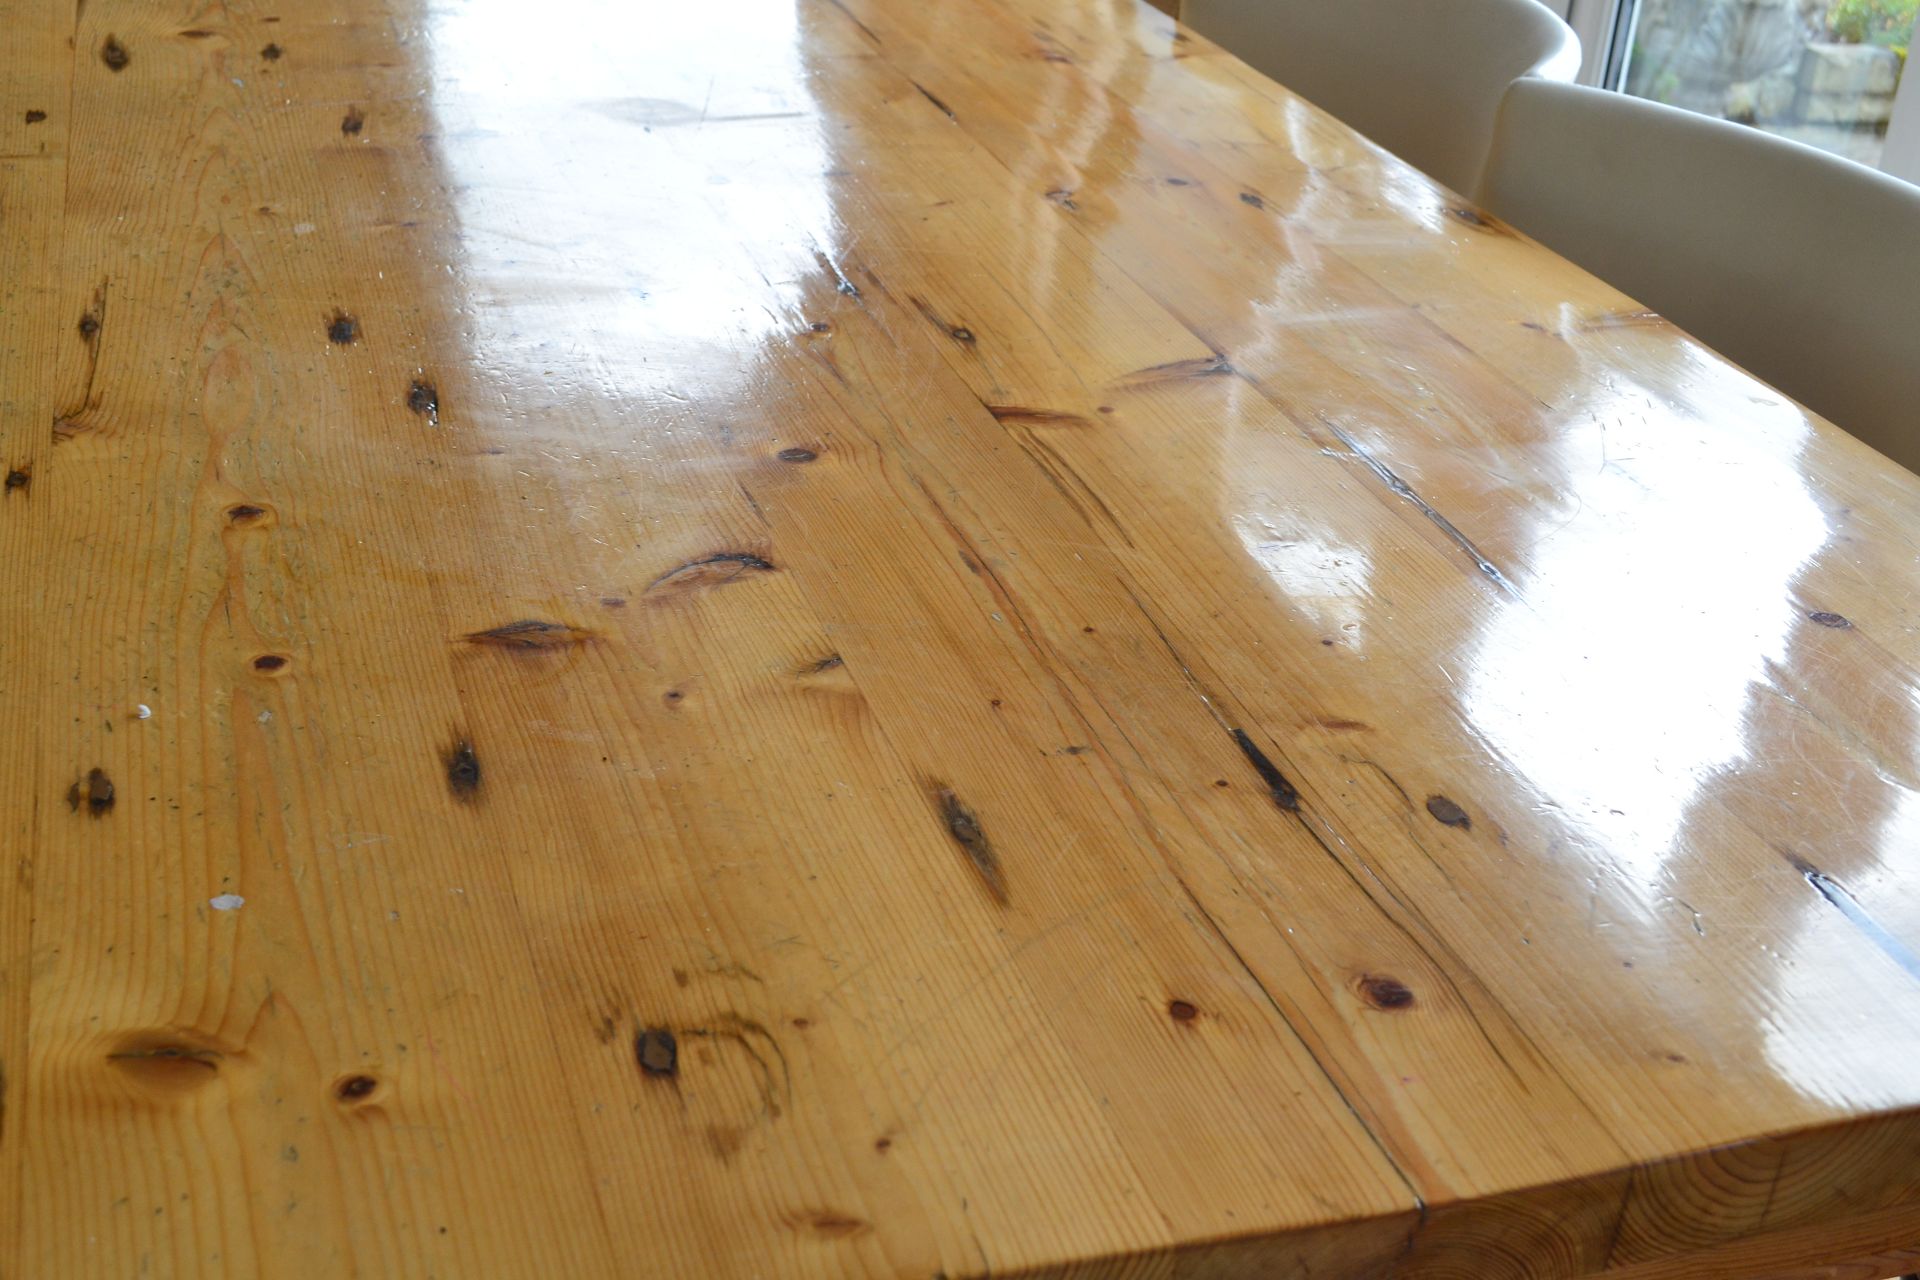 1 x Bespoke Pine Dining Table Made From Reclaimed Church Pews - CL226 - Location: Knutsford WA16 - Image 9 of 9